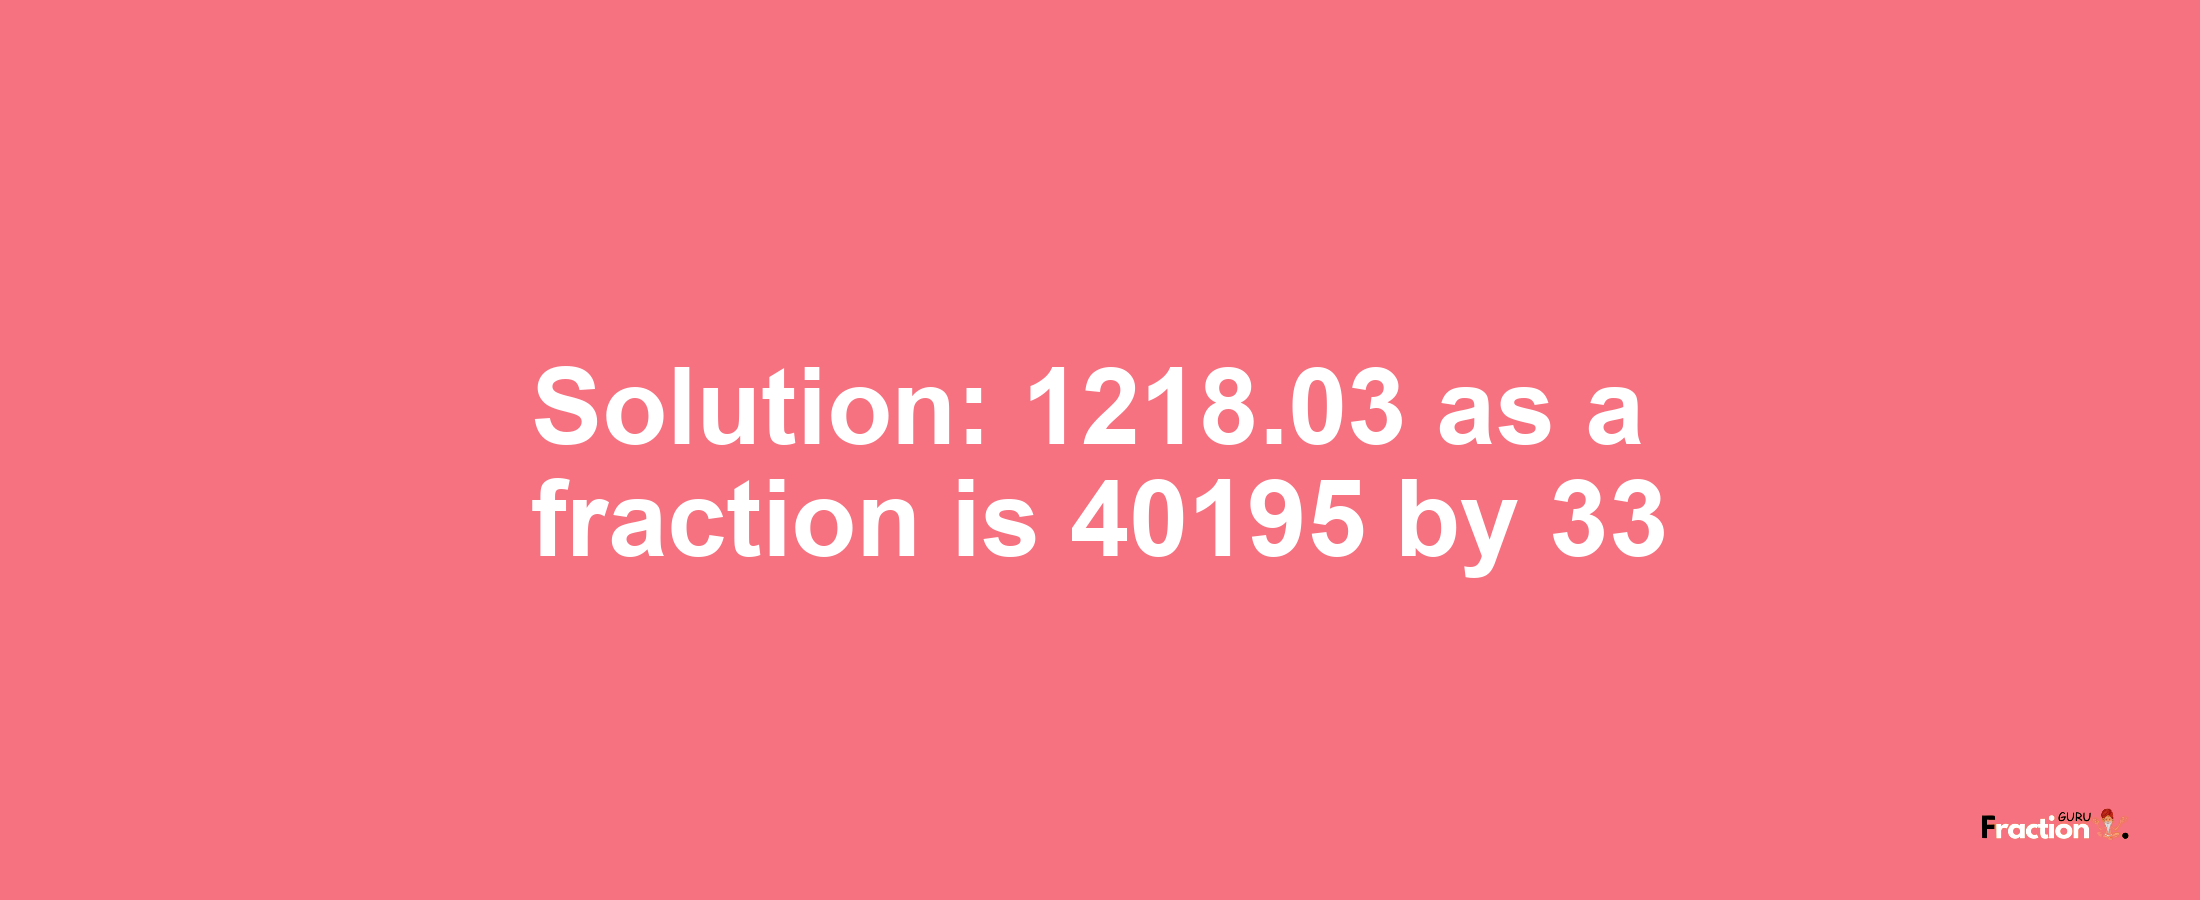 Solution:1218.03 as a fraction is 40195/33